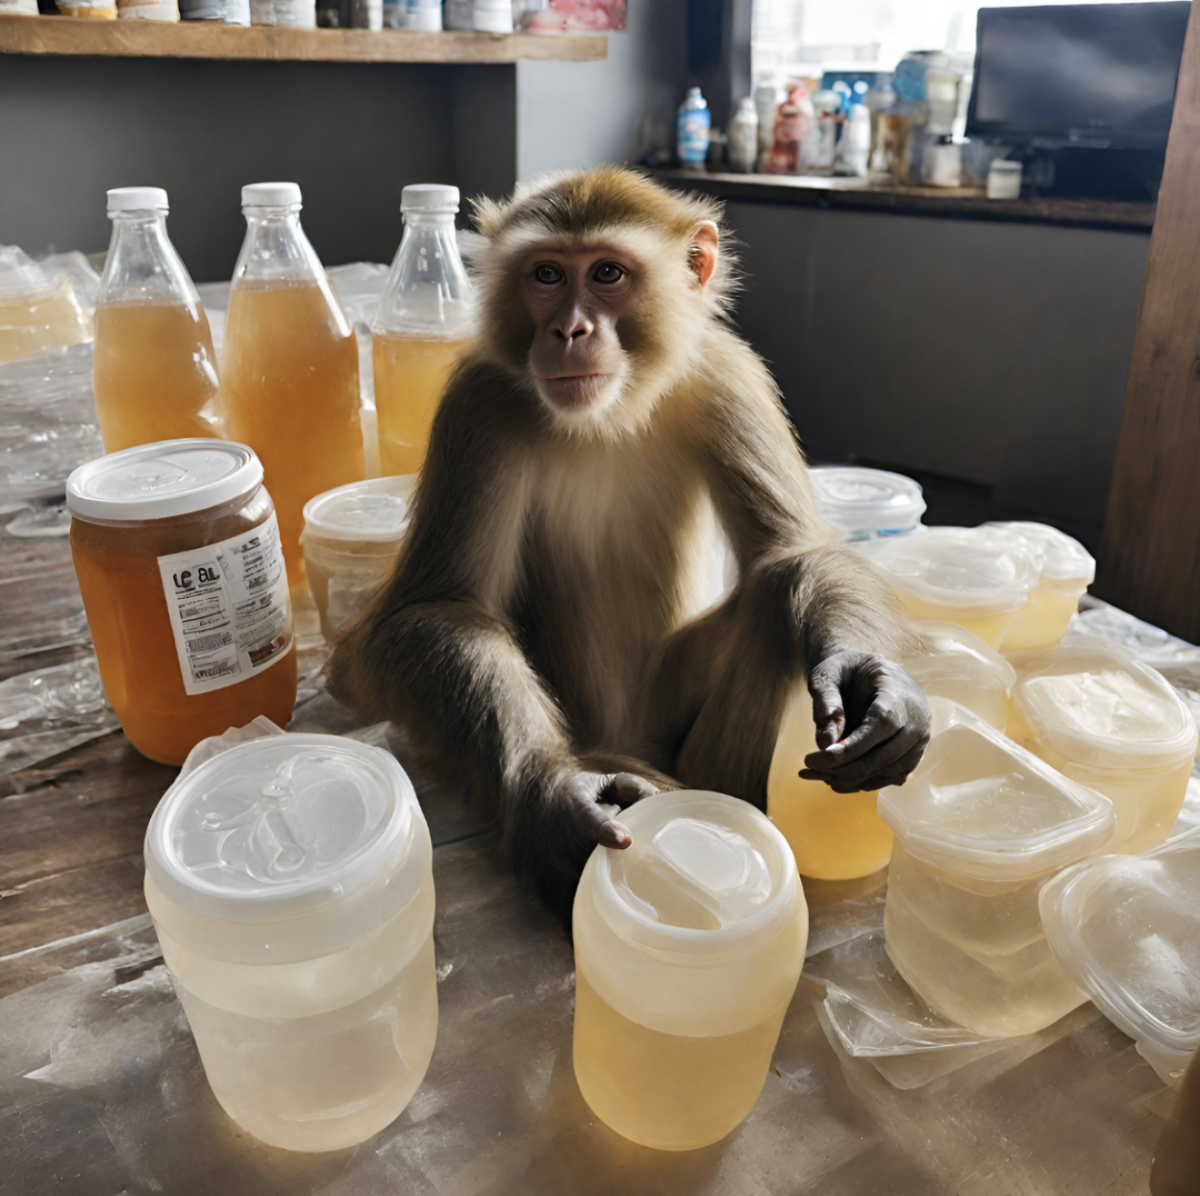 This+combines+the+three+addictions+mentioned+in+this+article%3A+kombucha%2C+plastic%2C+and+a+monkey+%28Generated+with+Canva%E2%80%99s+AI%29.